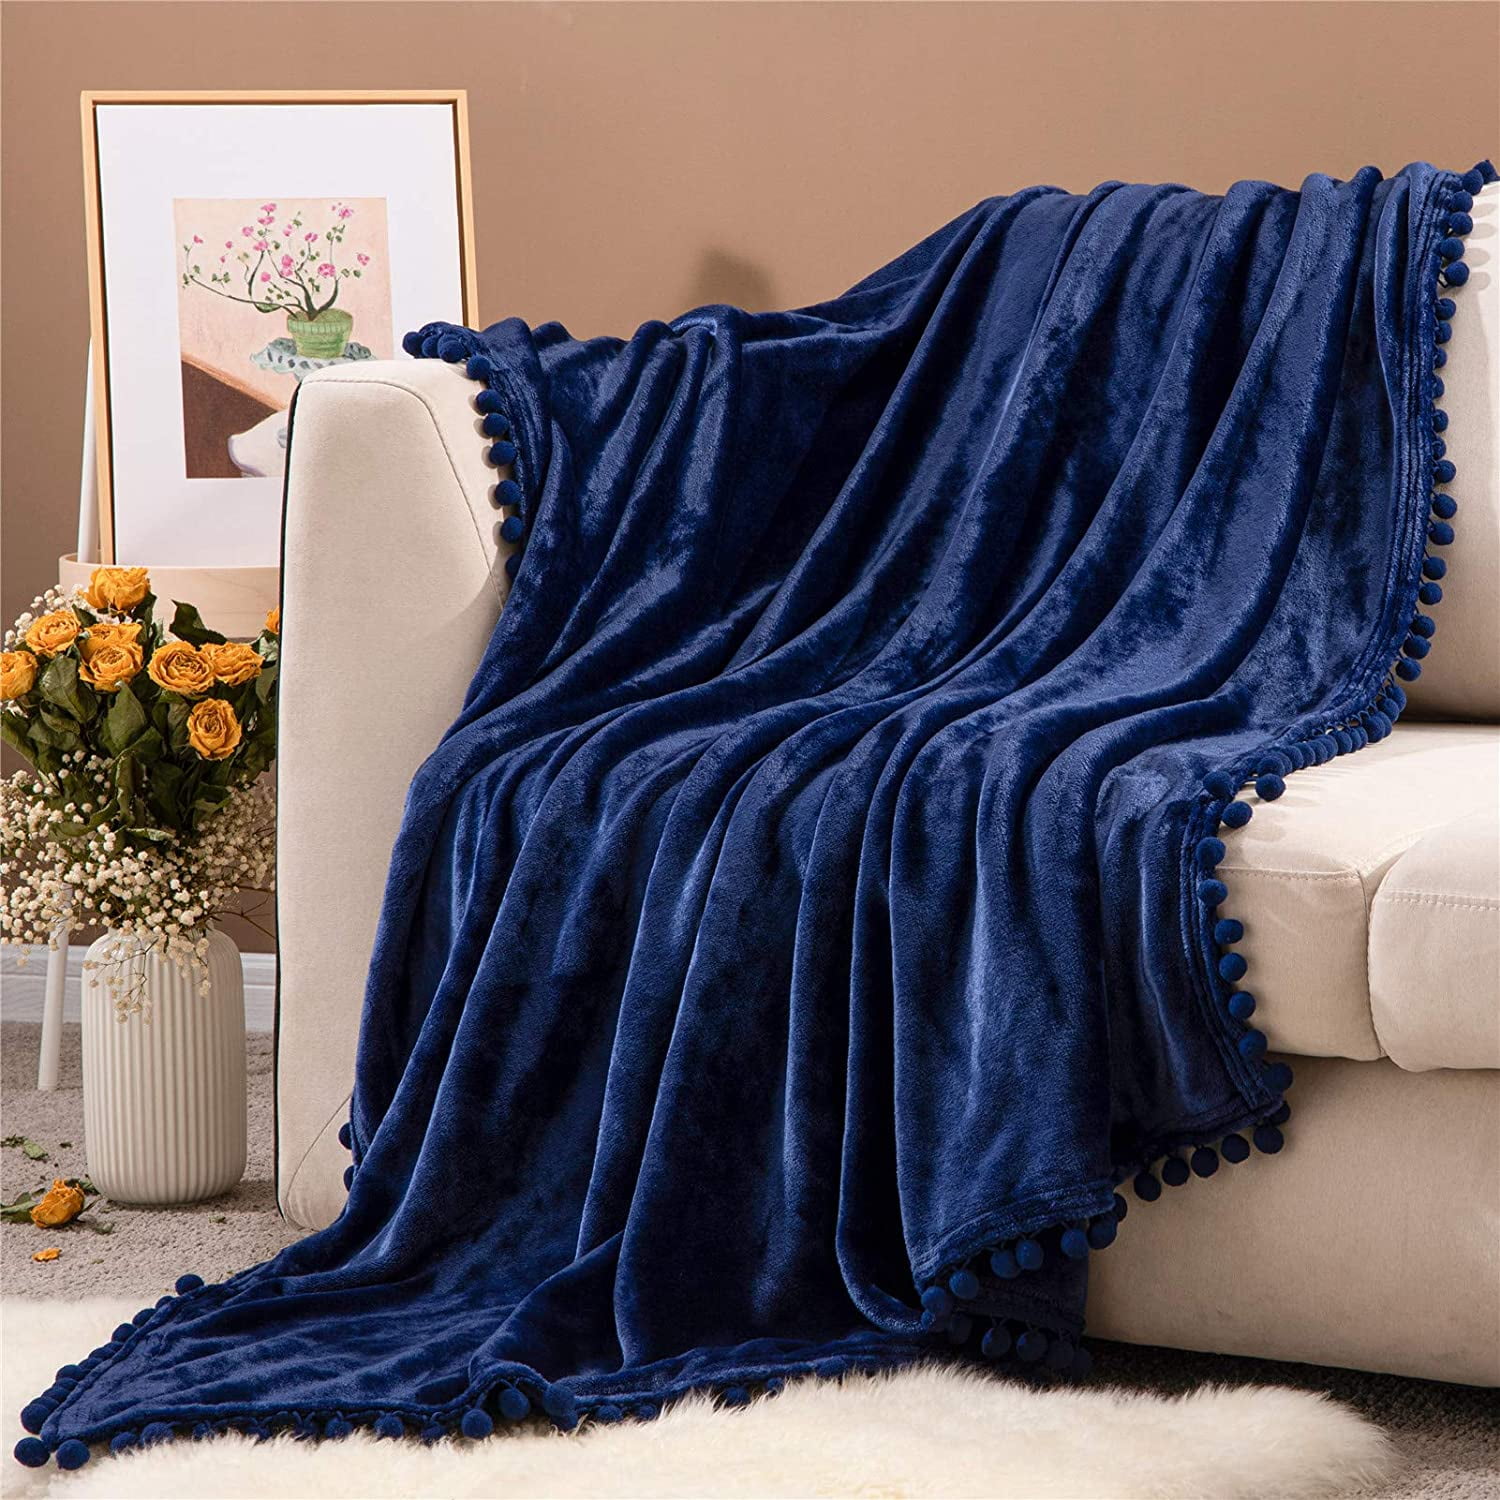 Lightweight Throw for Bed Chair Green and Blue Ocean Wave Line Couch Sofa Shine-Home Flannel Fleece Blanket Super Soft Cozy Luxury Fleece Blanket for All Season 50x80